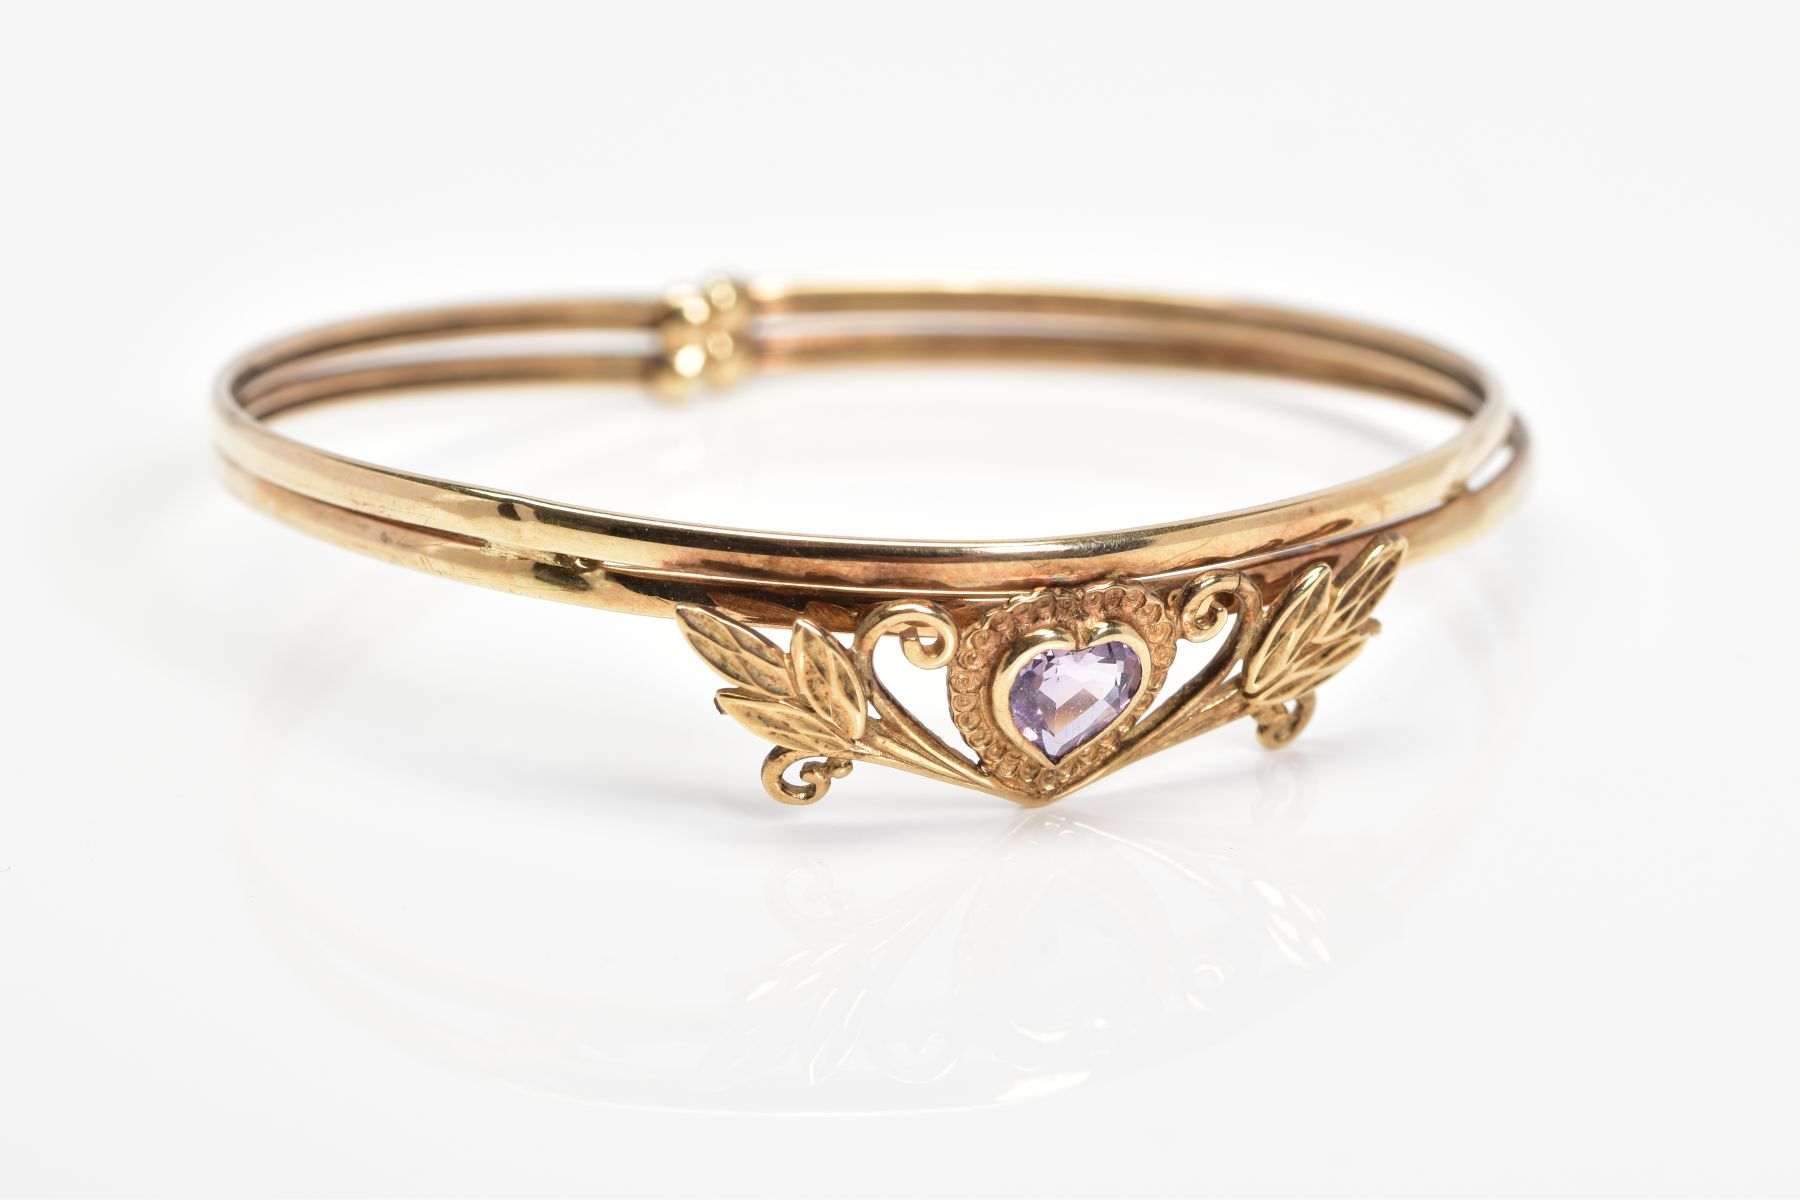 AN AMETHYST BANGLE, designed with a heart shape amethyst in a collet setting within a foliate